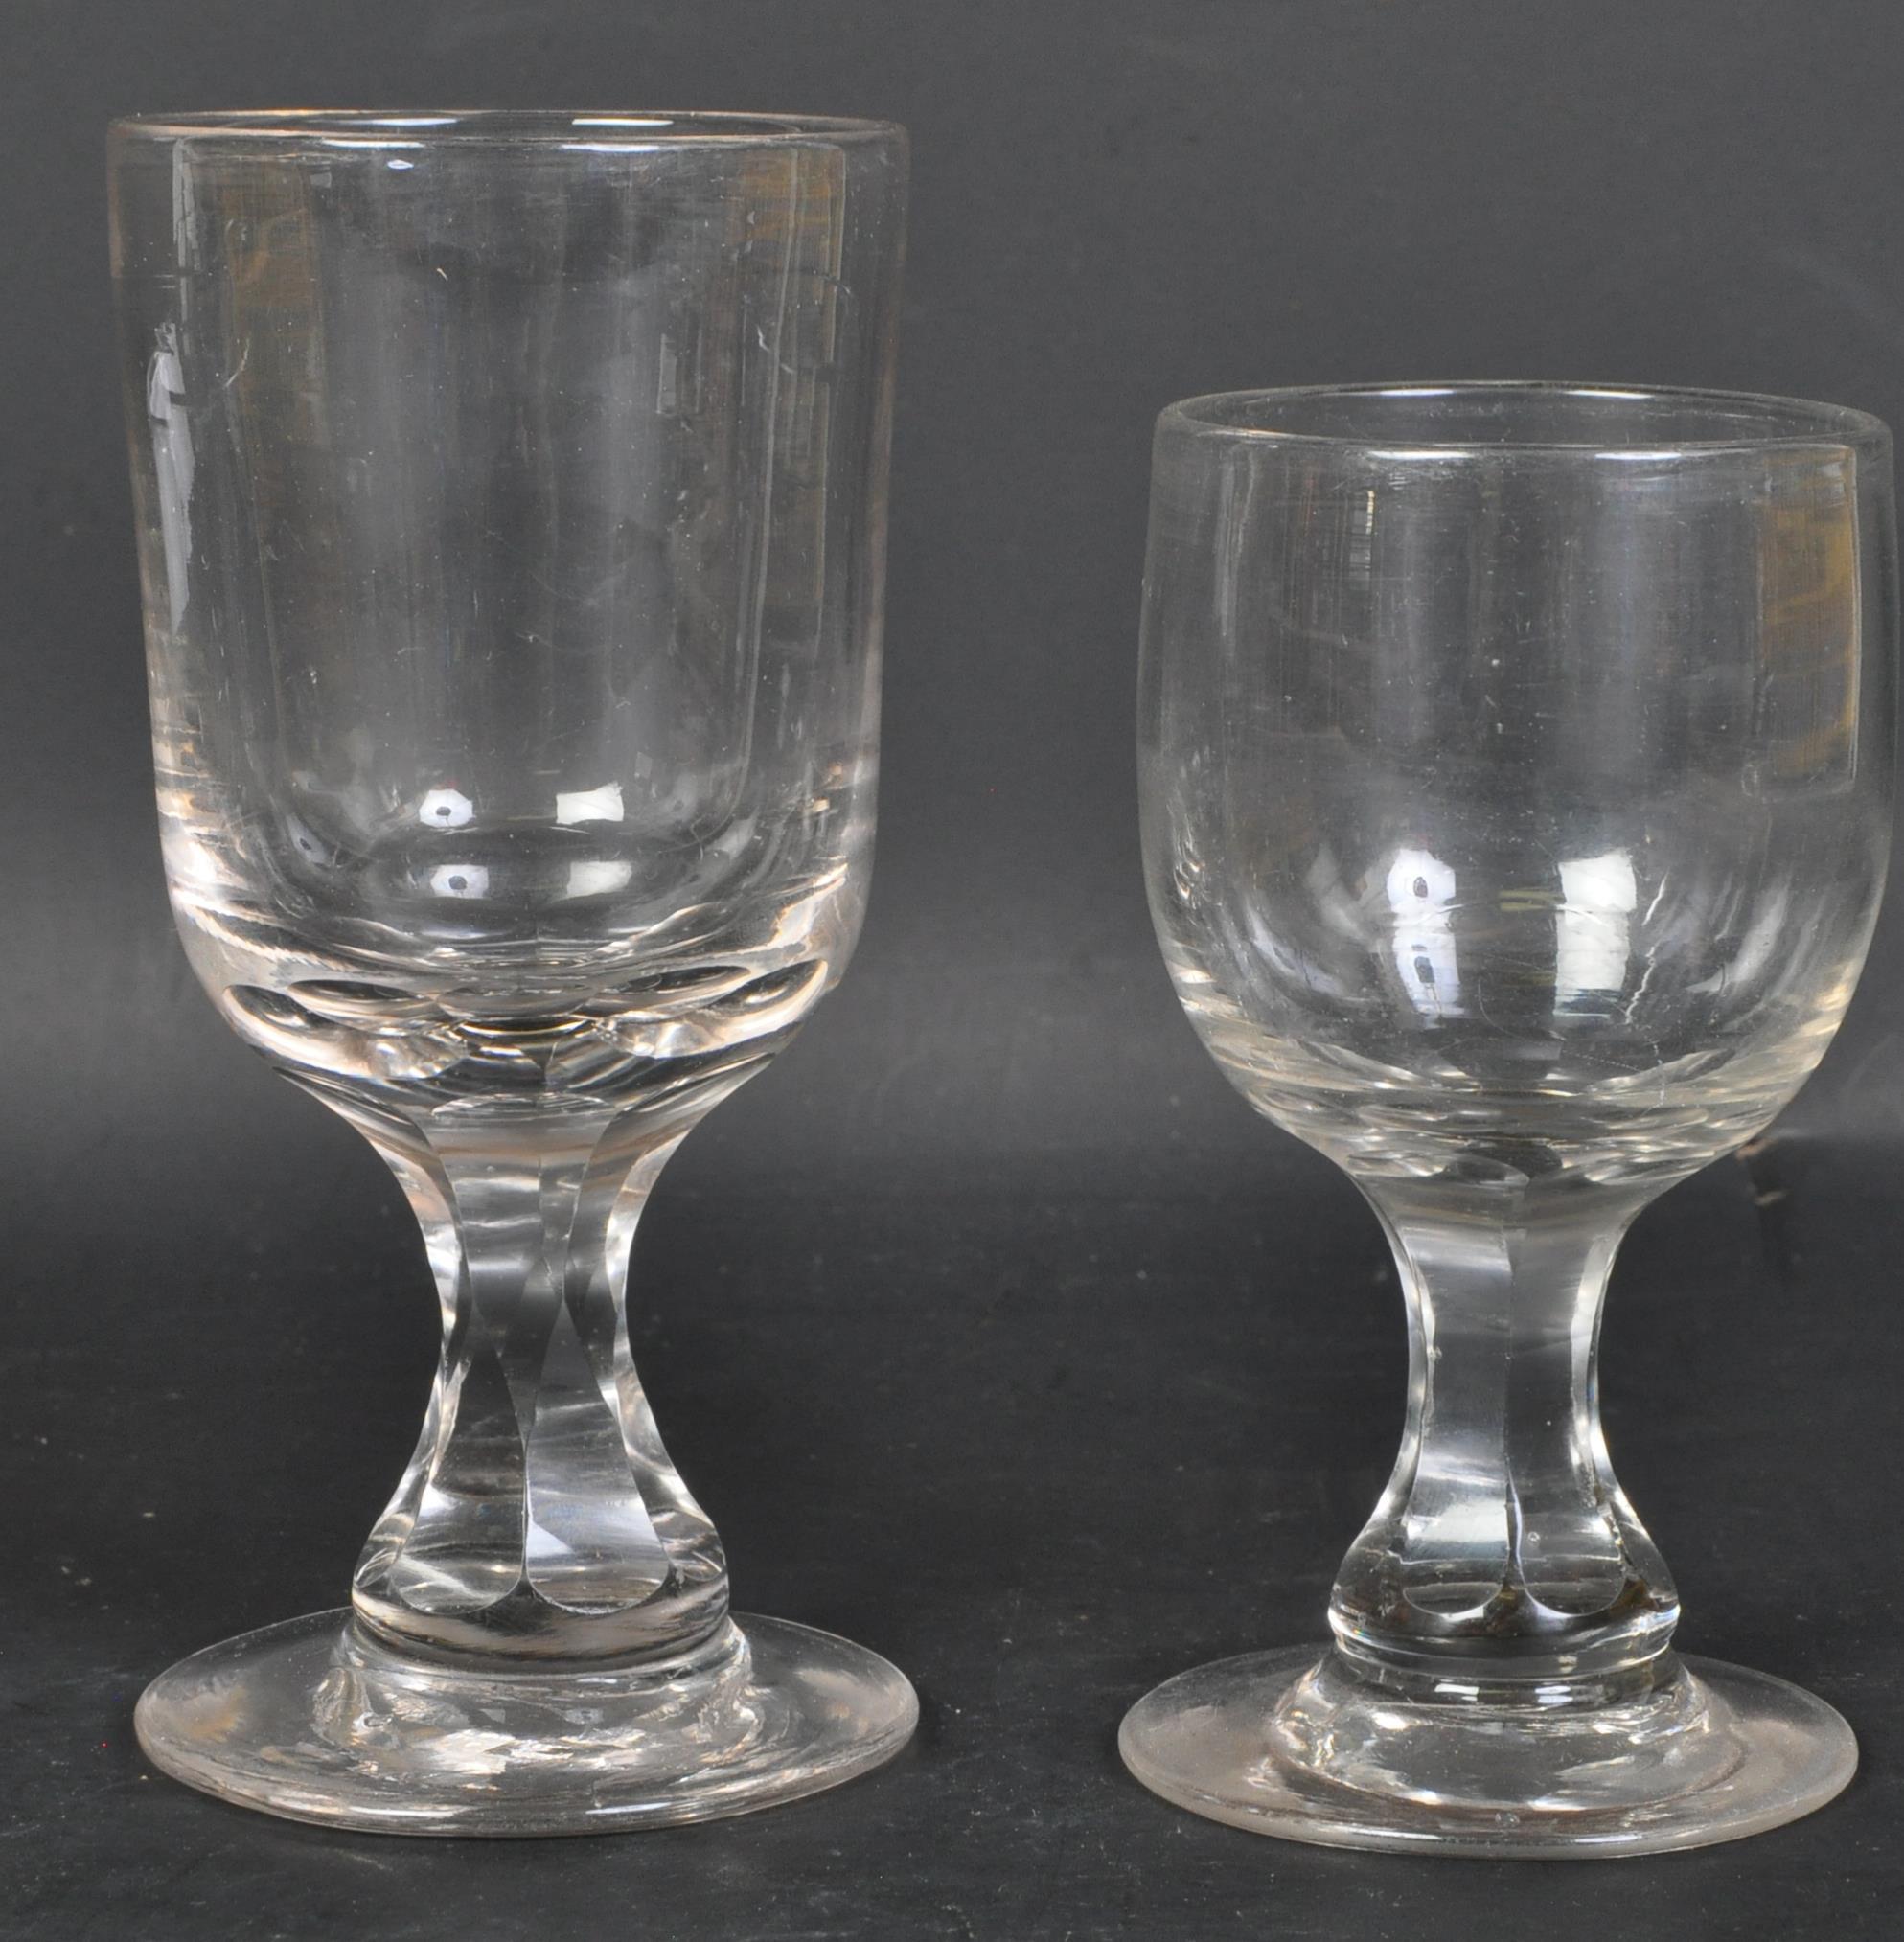 FOUR 19TH CENTURY GLASS RUMMER DRINKING GLASSES - Image 3 of 4